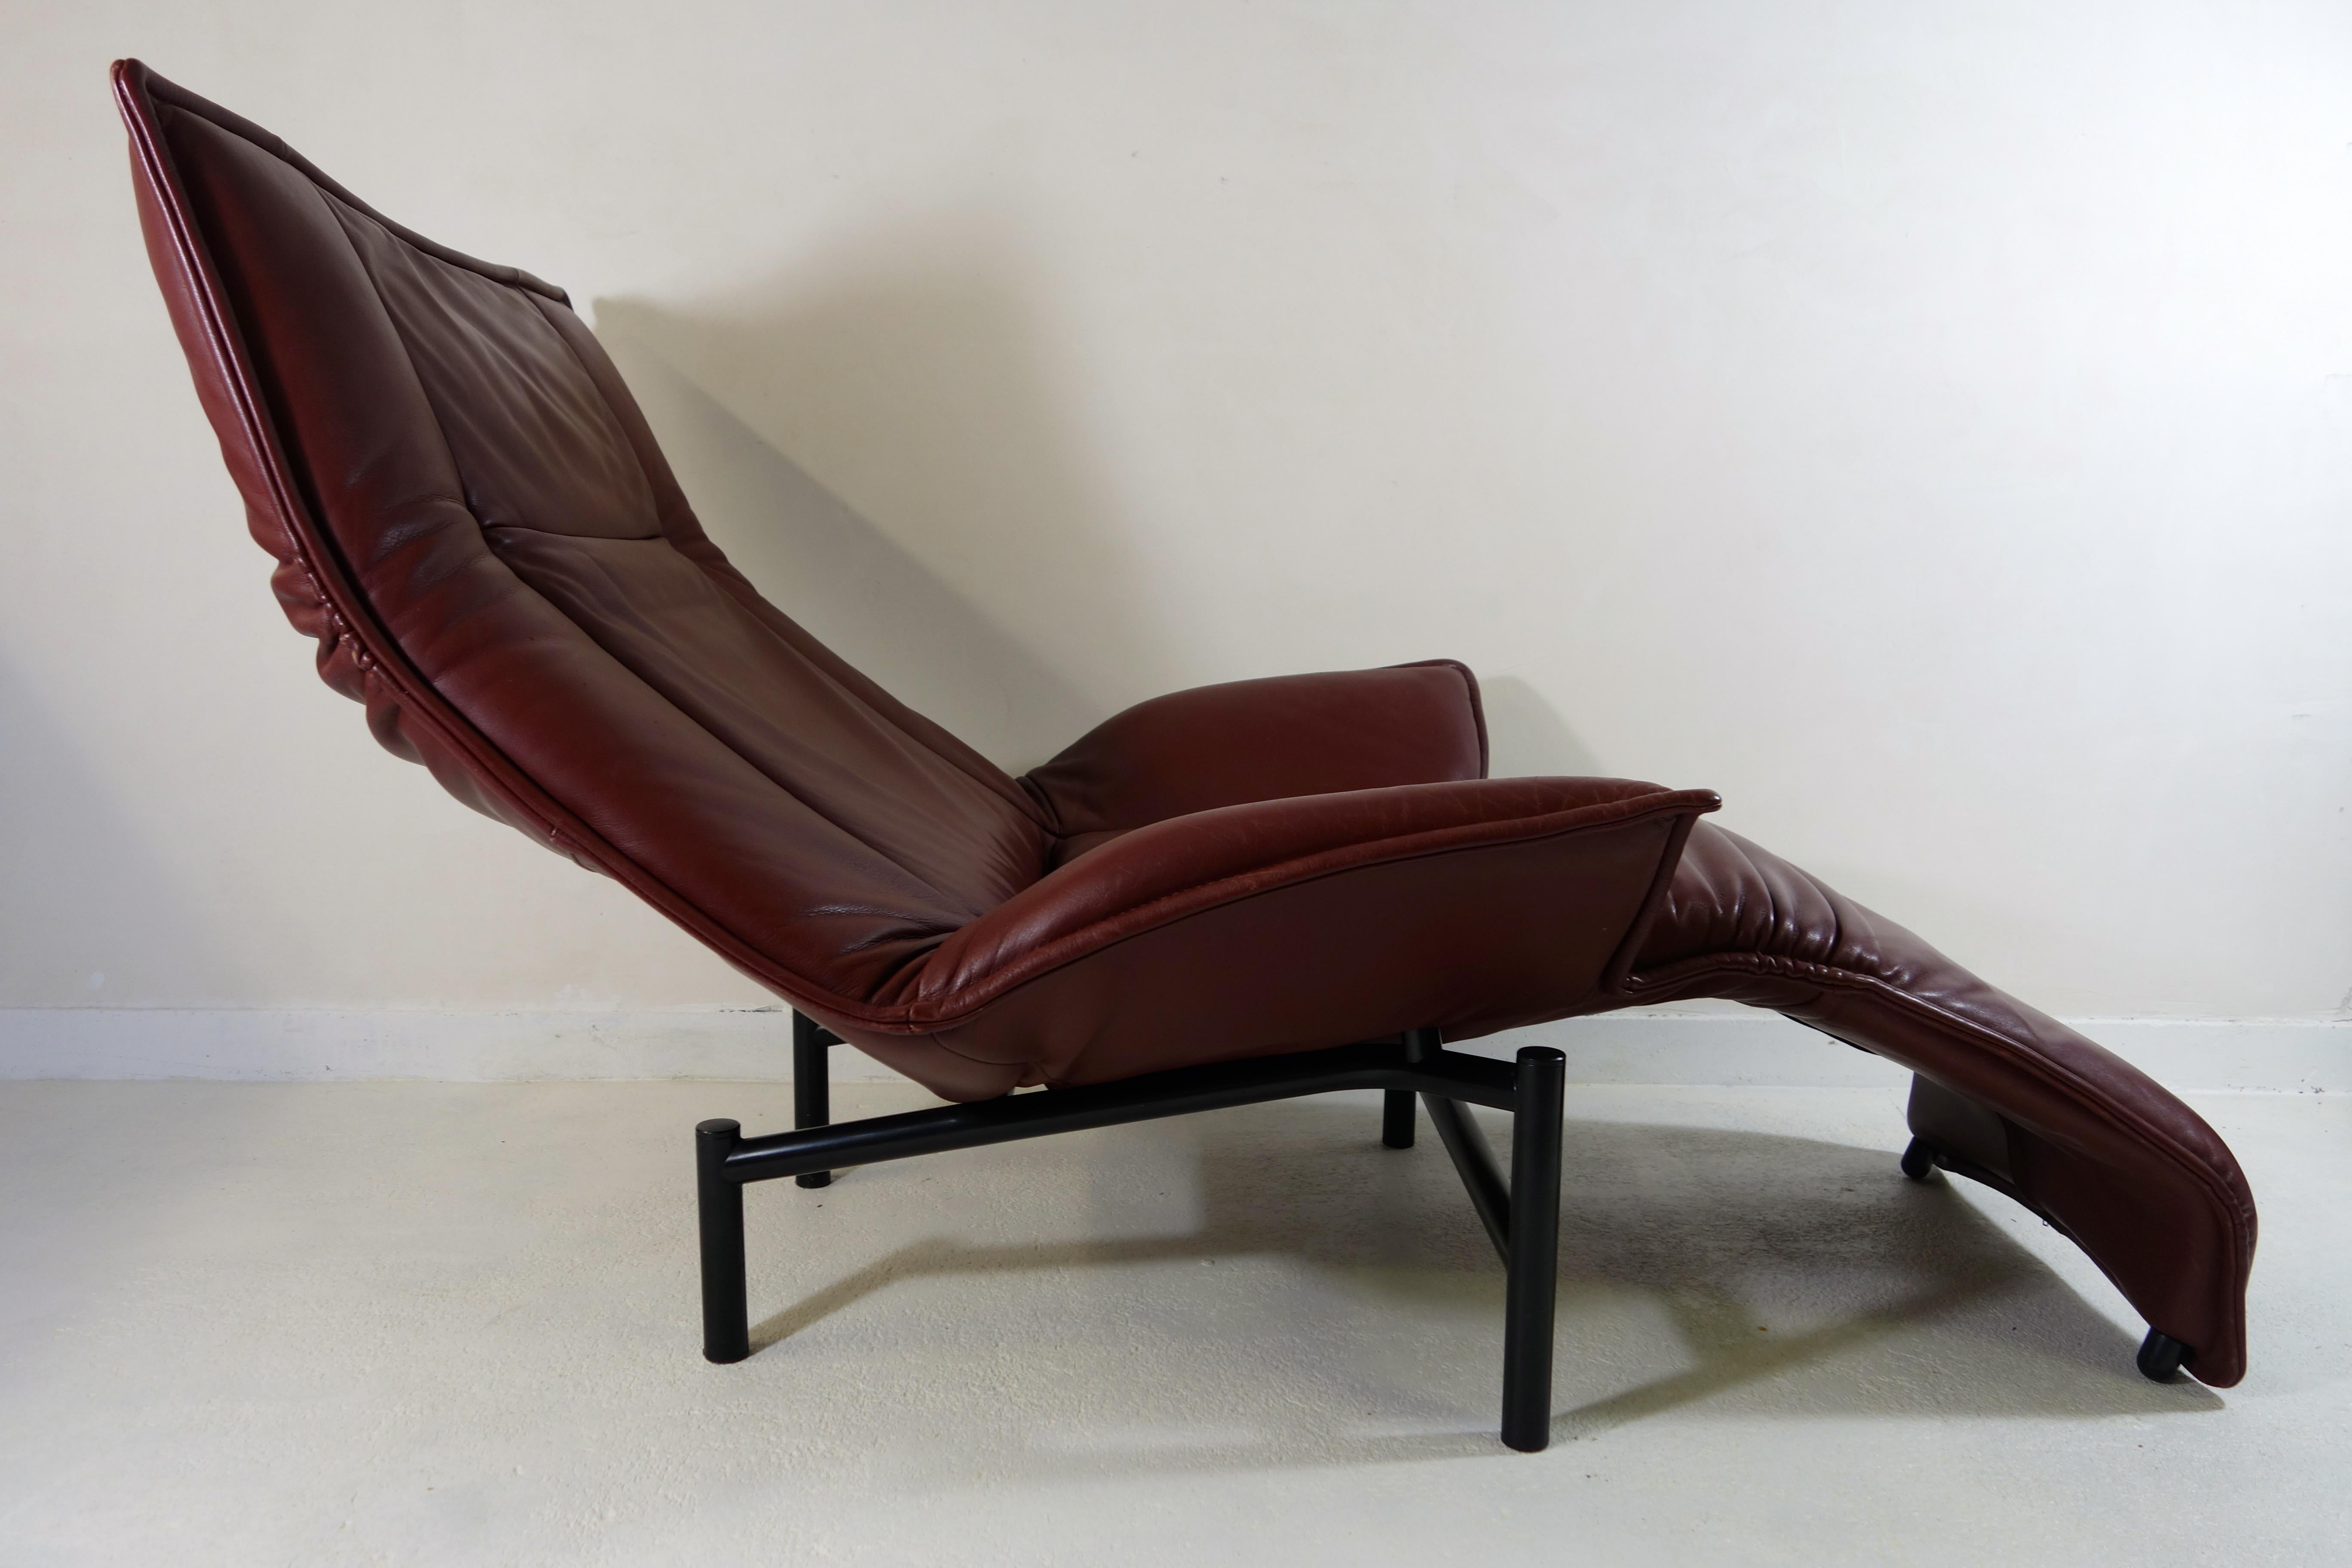 Late 20th Century Veranda Lounge Chair by Vico Magistretti for Cassina in Brown Leather Reclining